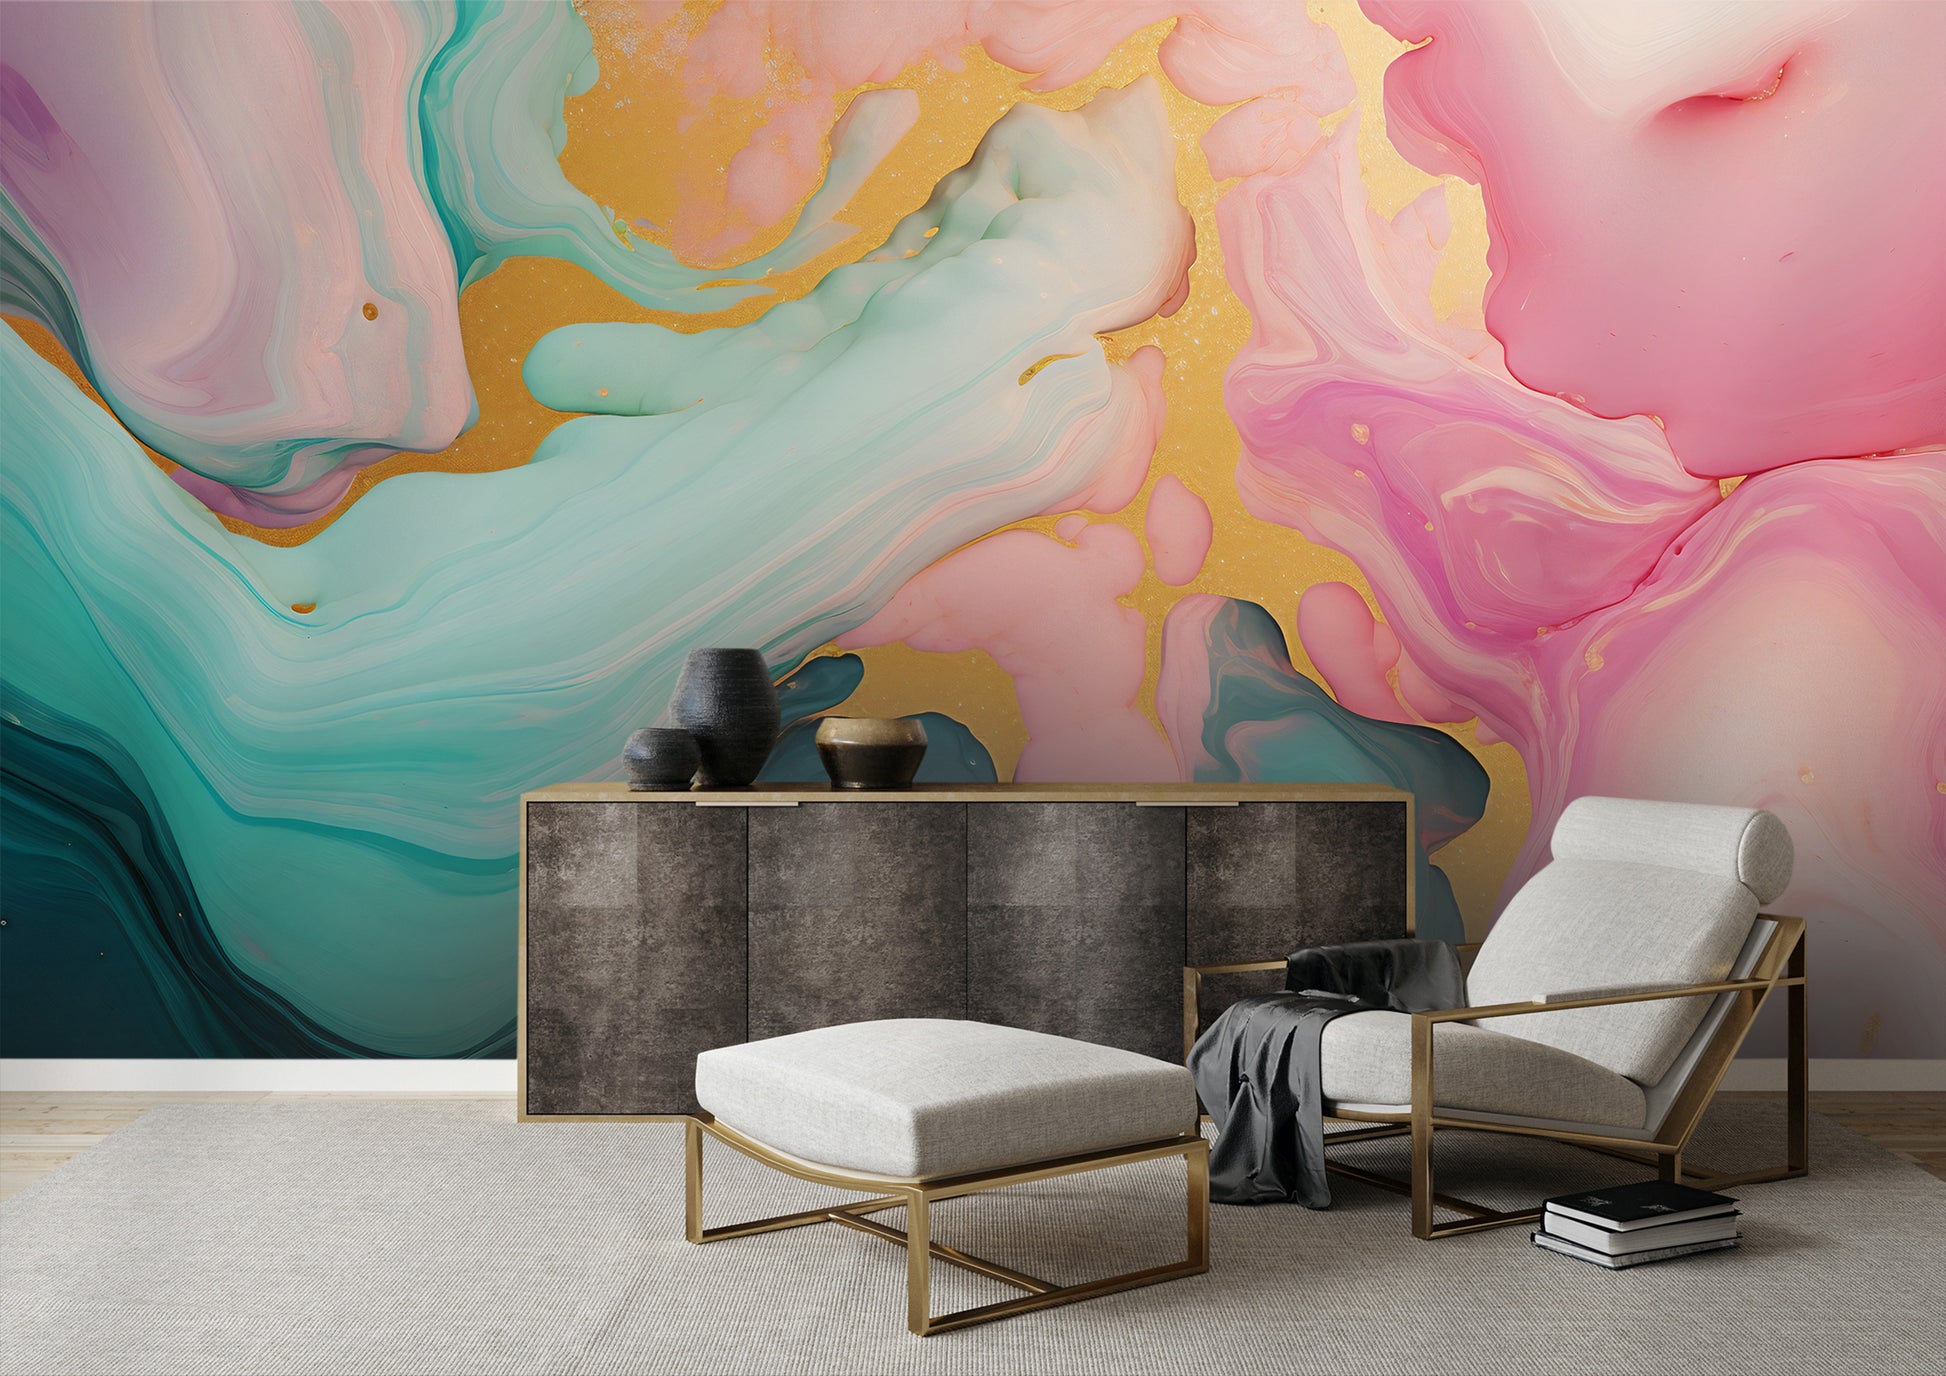 Captivating Pink, Gold, and Green Abstract Wallpaper for Eye-Catching Interiors